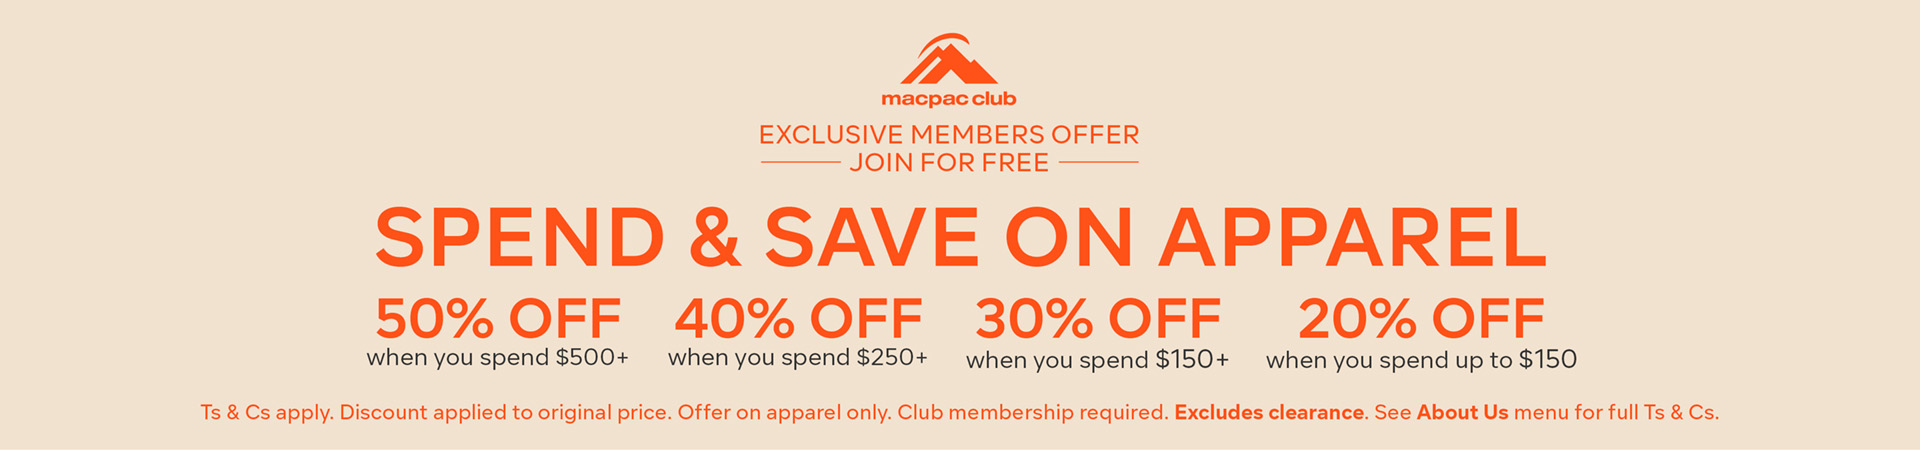 Macpac Club - Spend and Save on Apparel - SHOP NOW